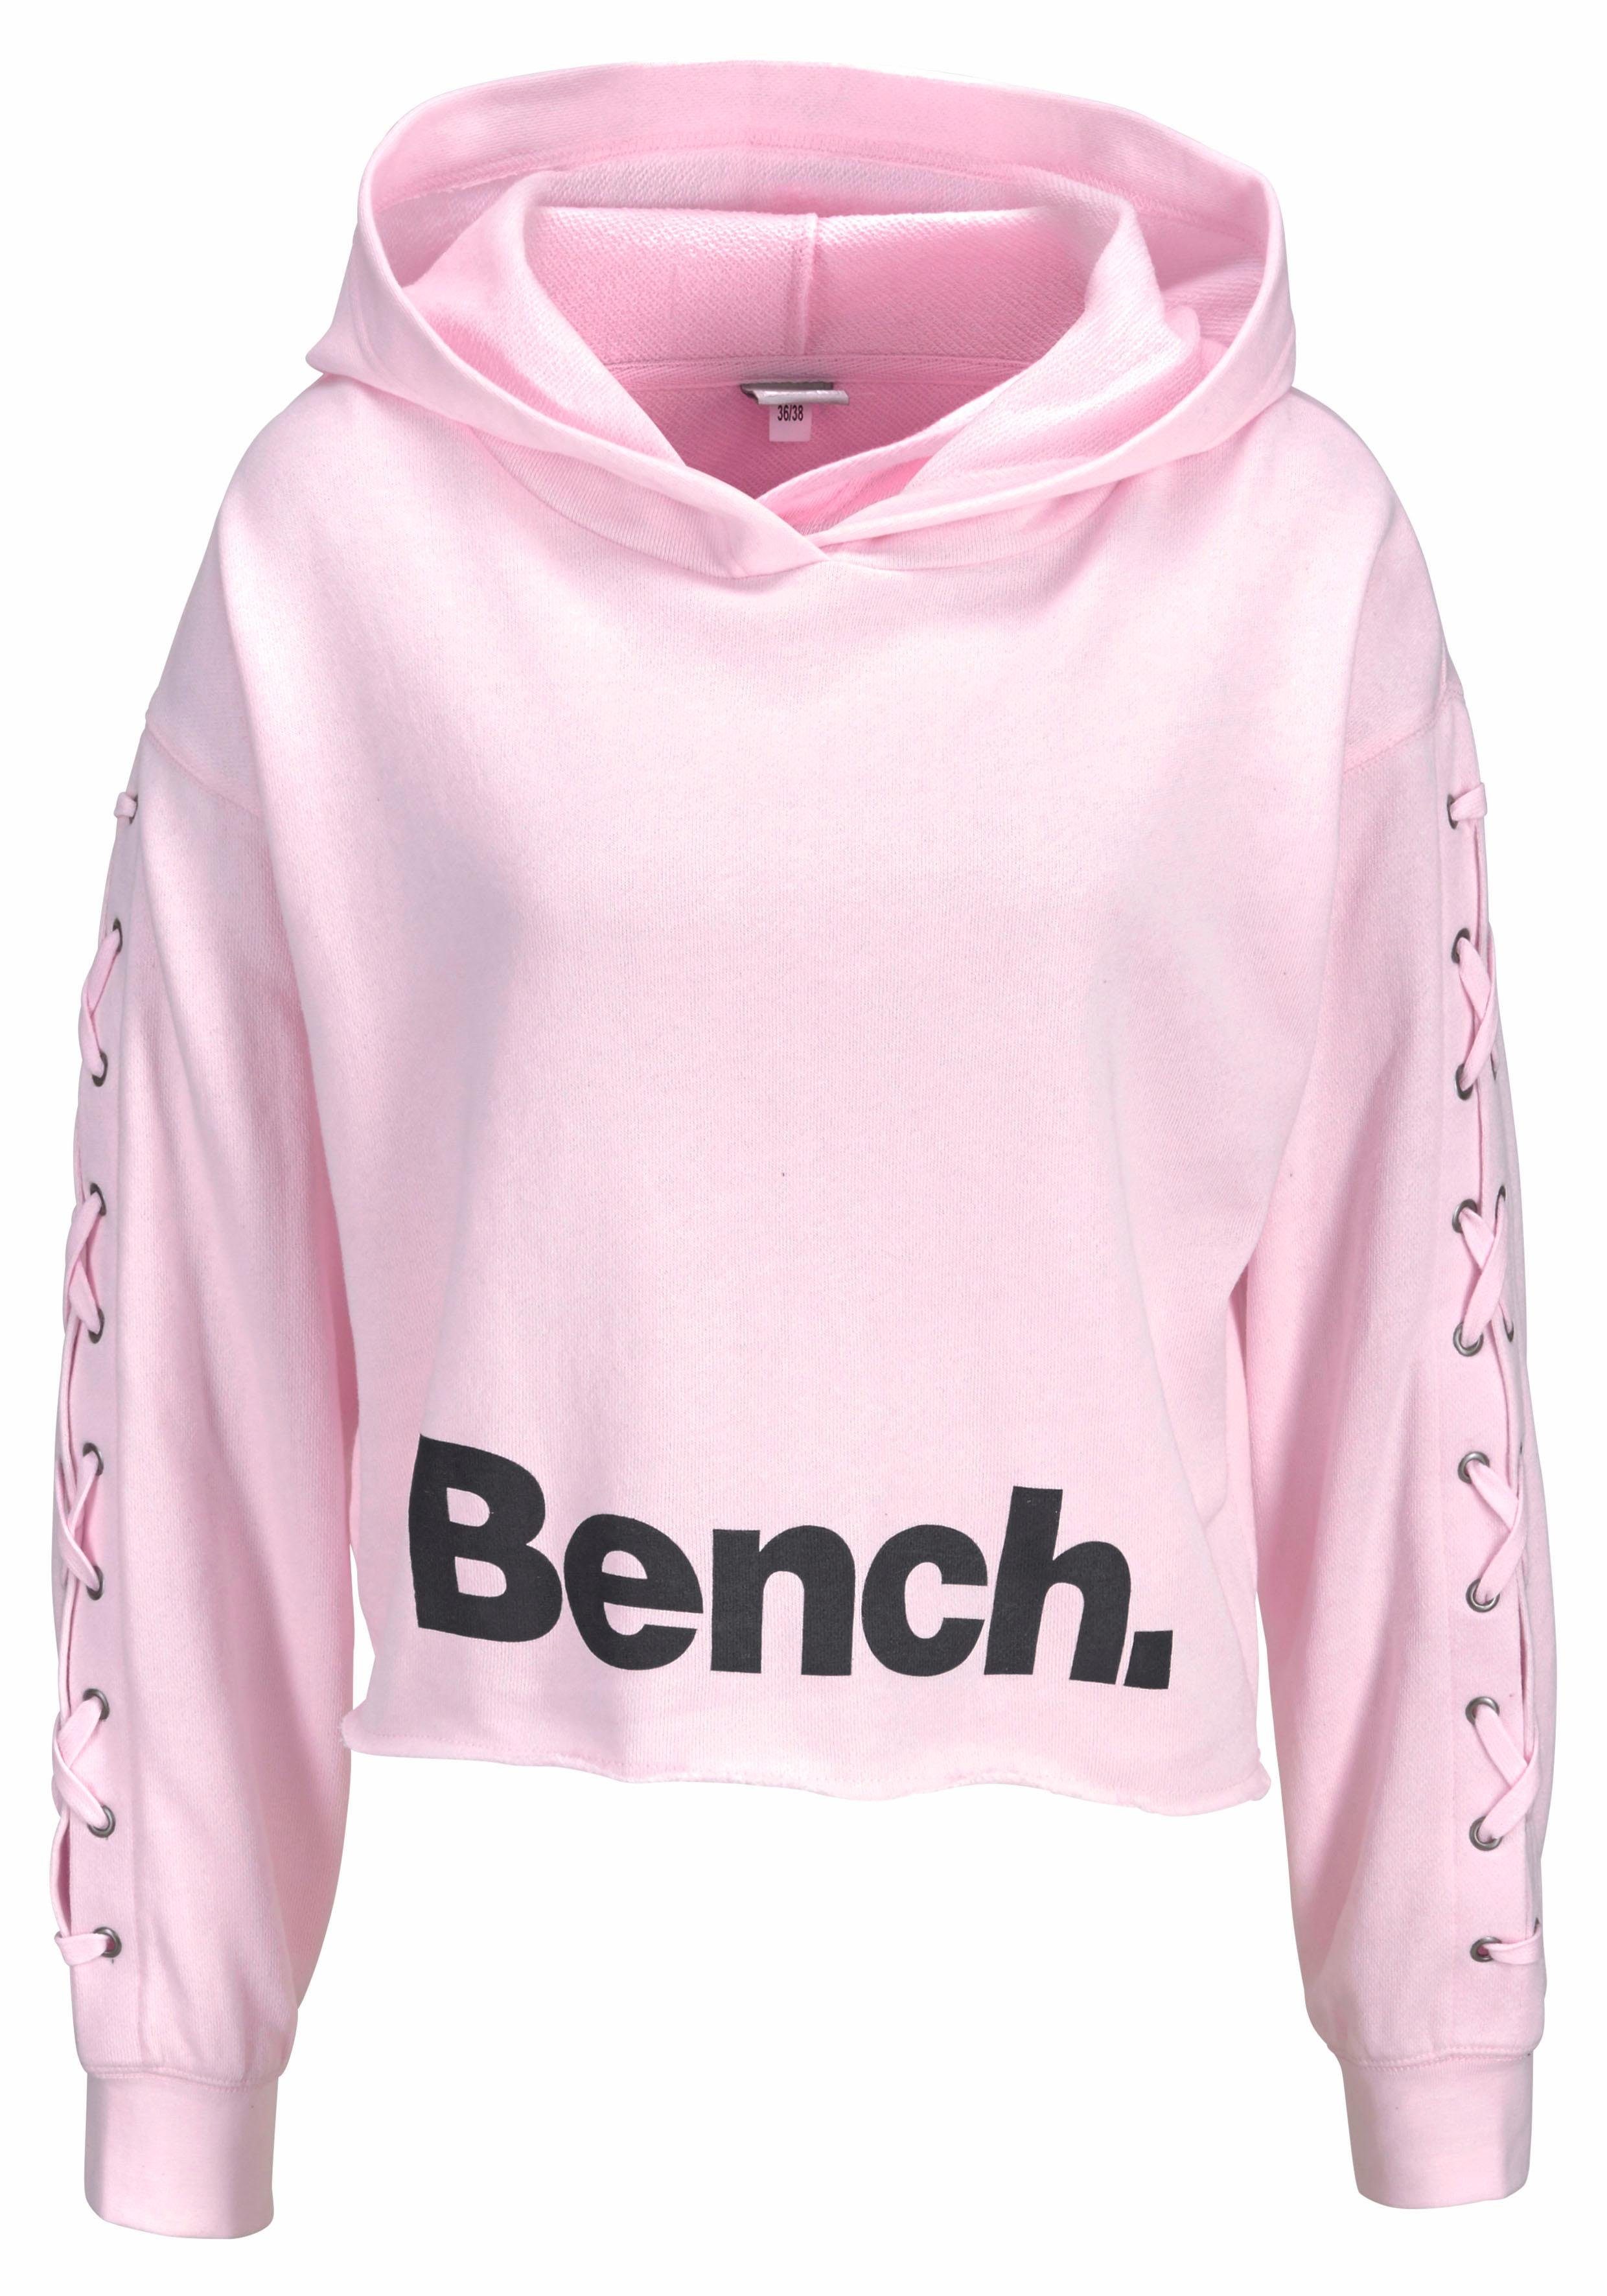 Otto - Bench. NU 15% KORTING: Bench. sweater